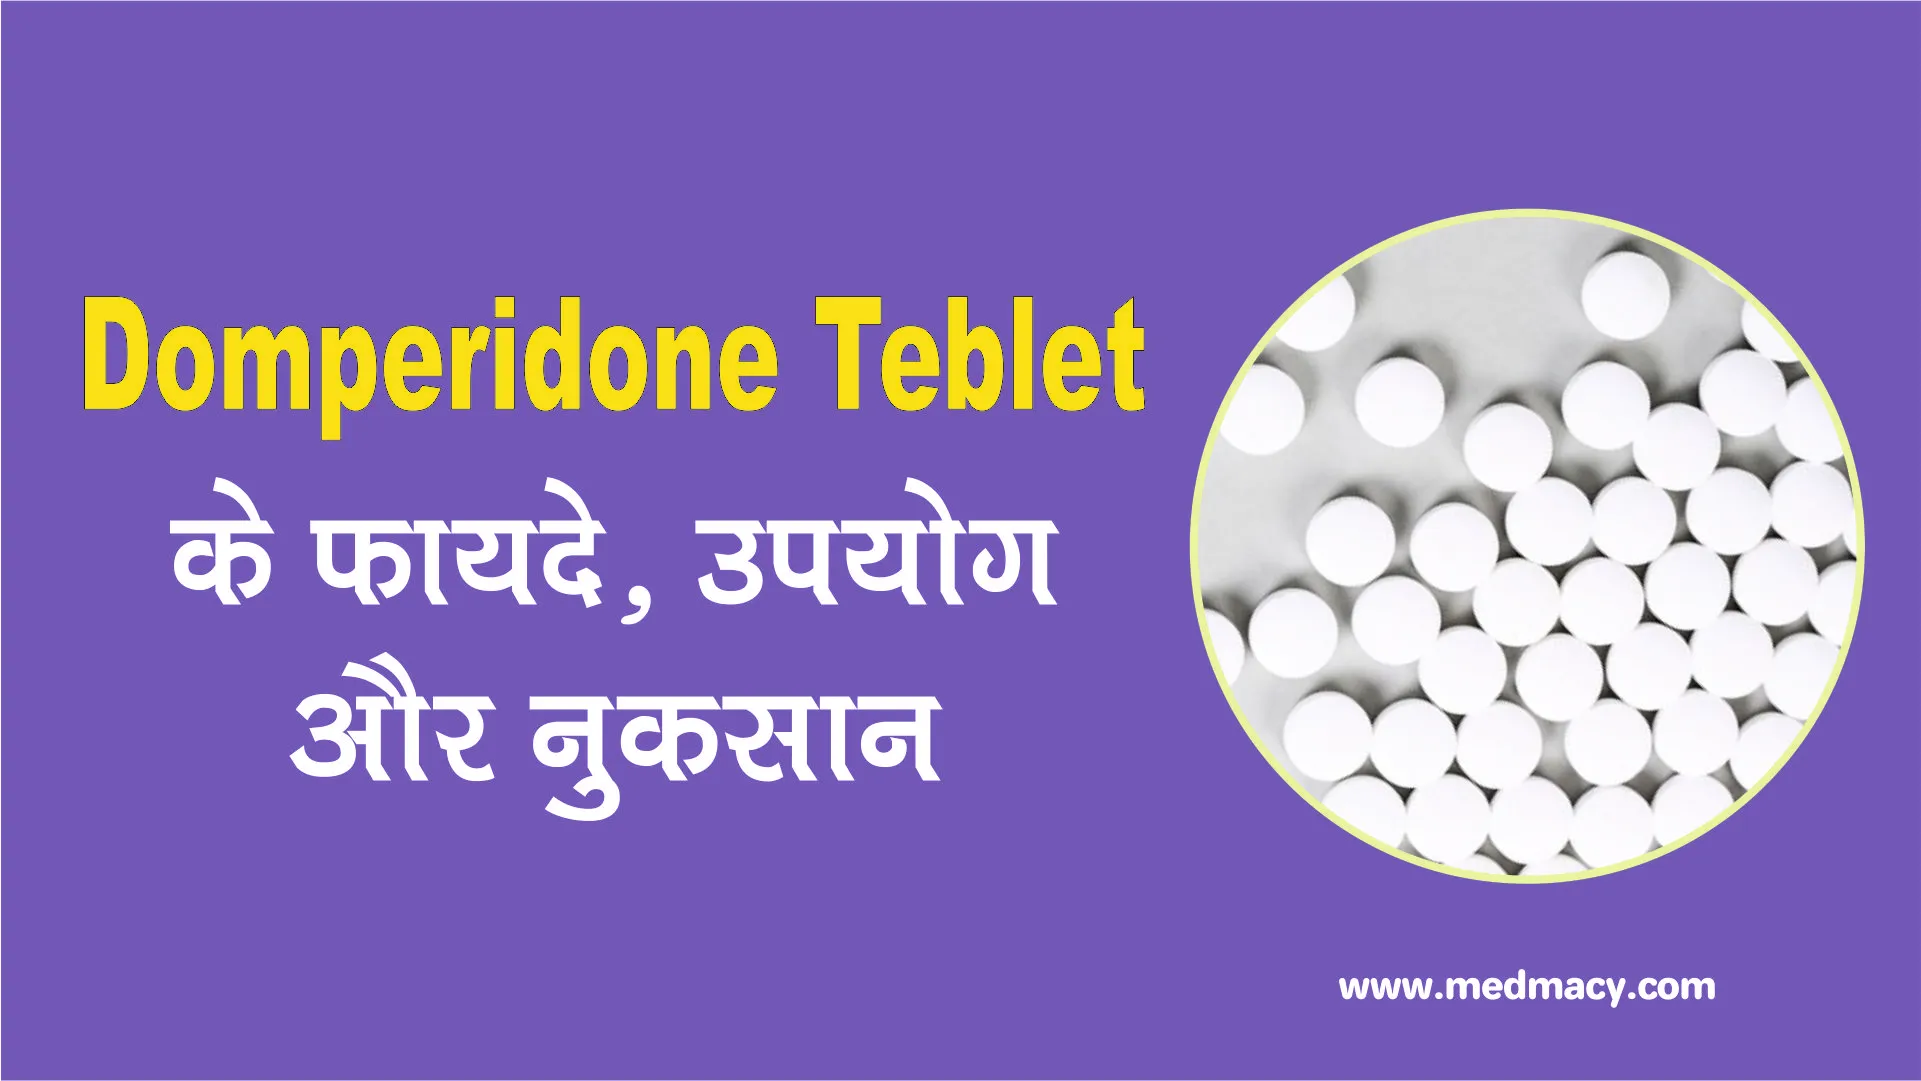 Domperidone Tablet Uses in Hindi